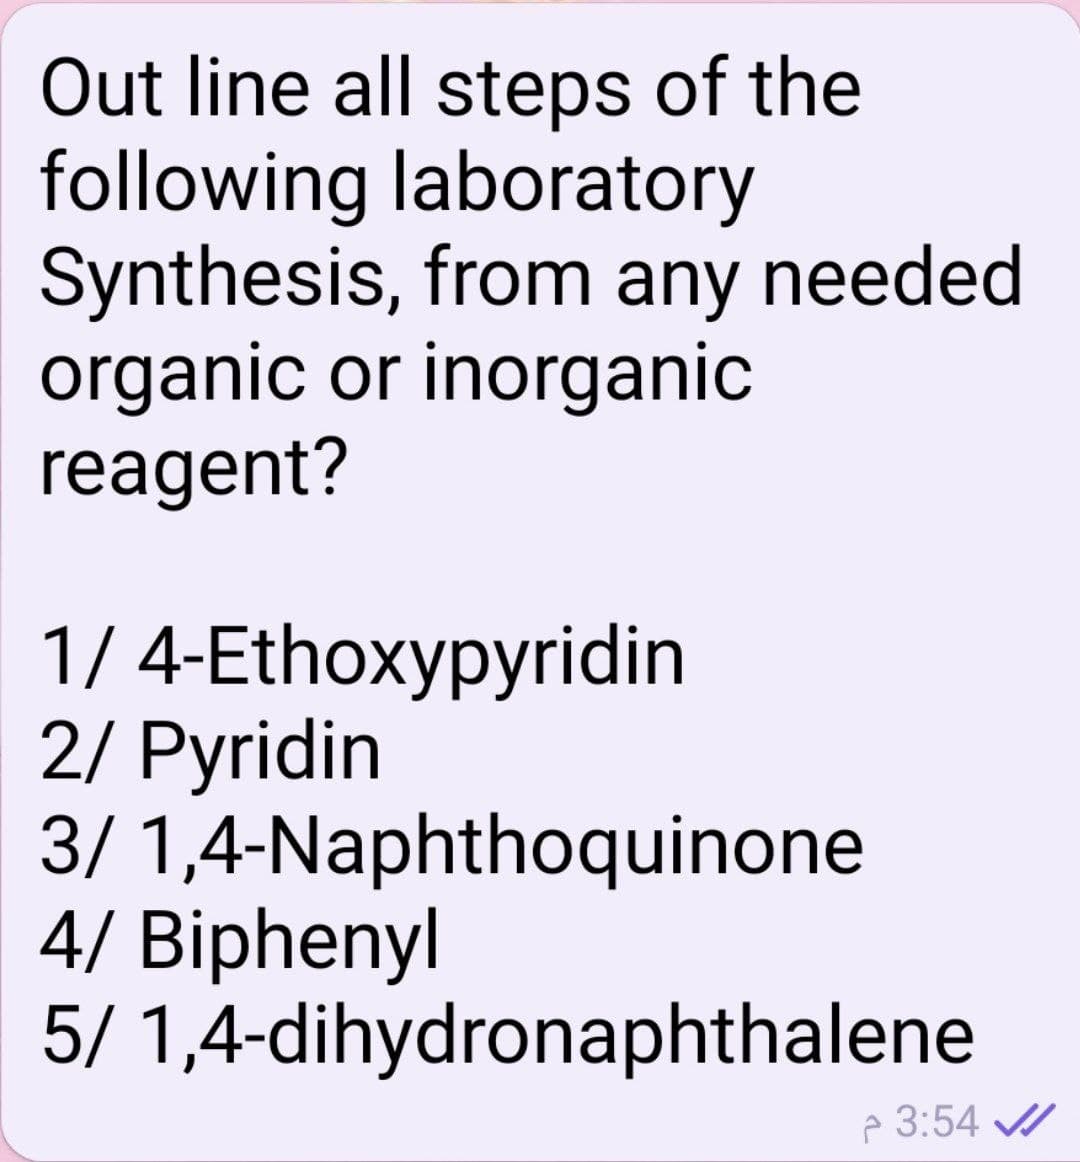 Out line all steps of the
following laboratory
Synthesis, from any needed
organic or inorganic
reagent?
1/ 4-Ethoxypyridin
2/ Pyridin
3/ 1,4-Naphthoquinone
4/ Biphenyl
5/ 1,4-dihydronaphthalene
p 3:54 /
